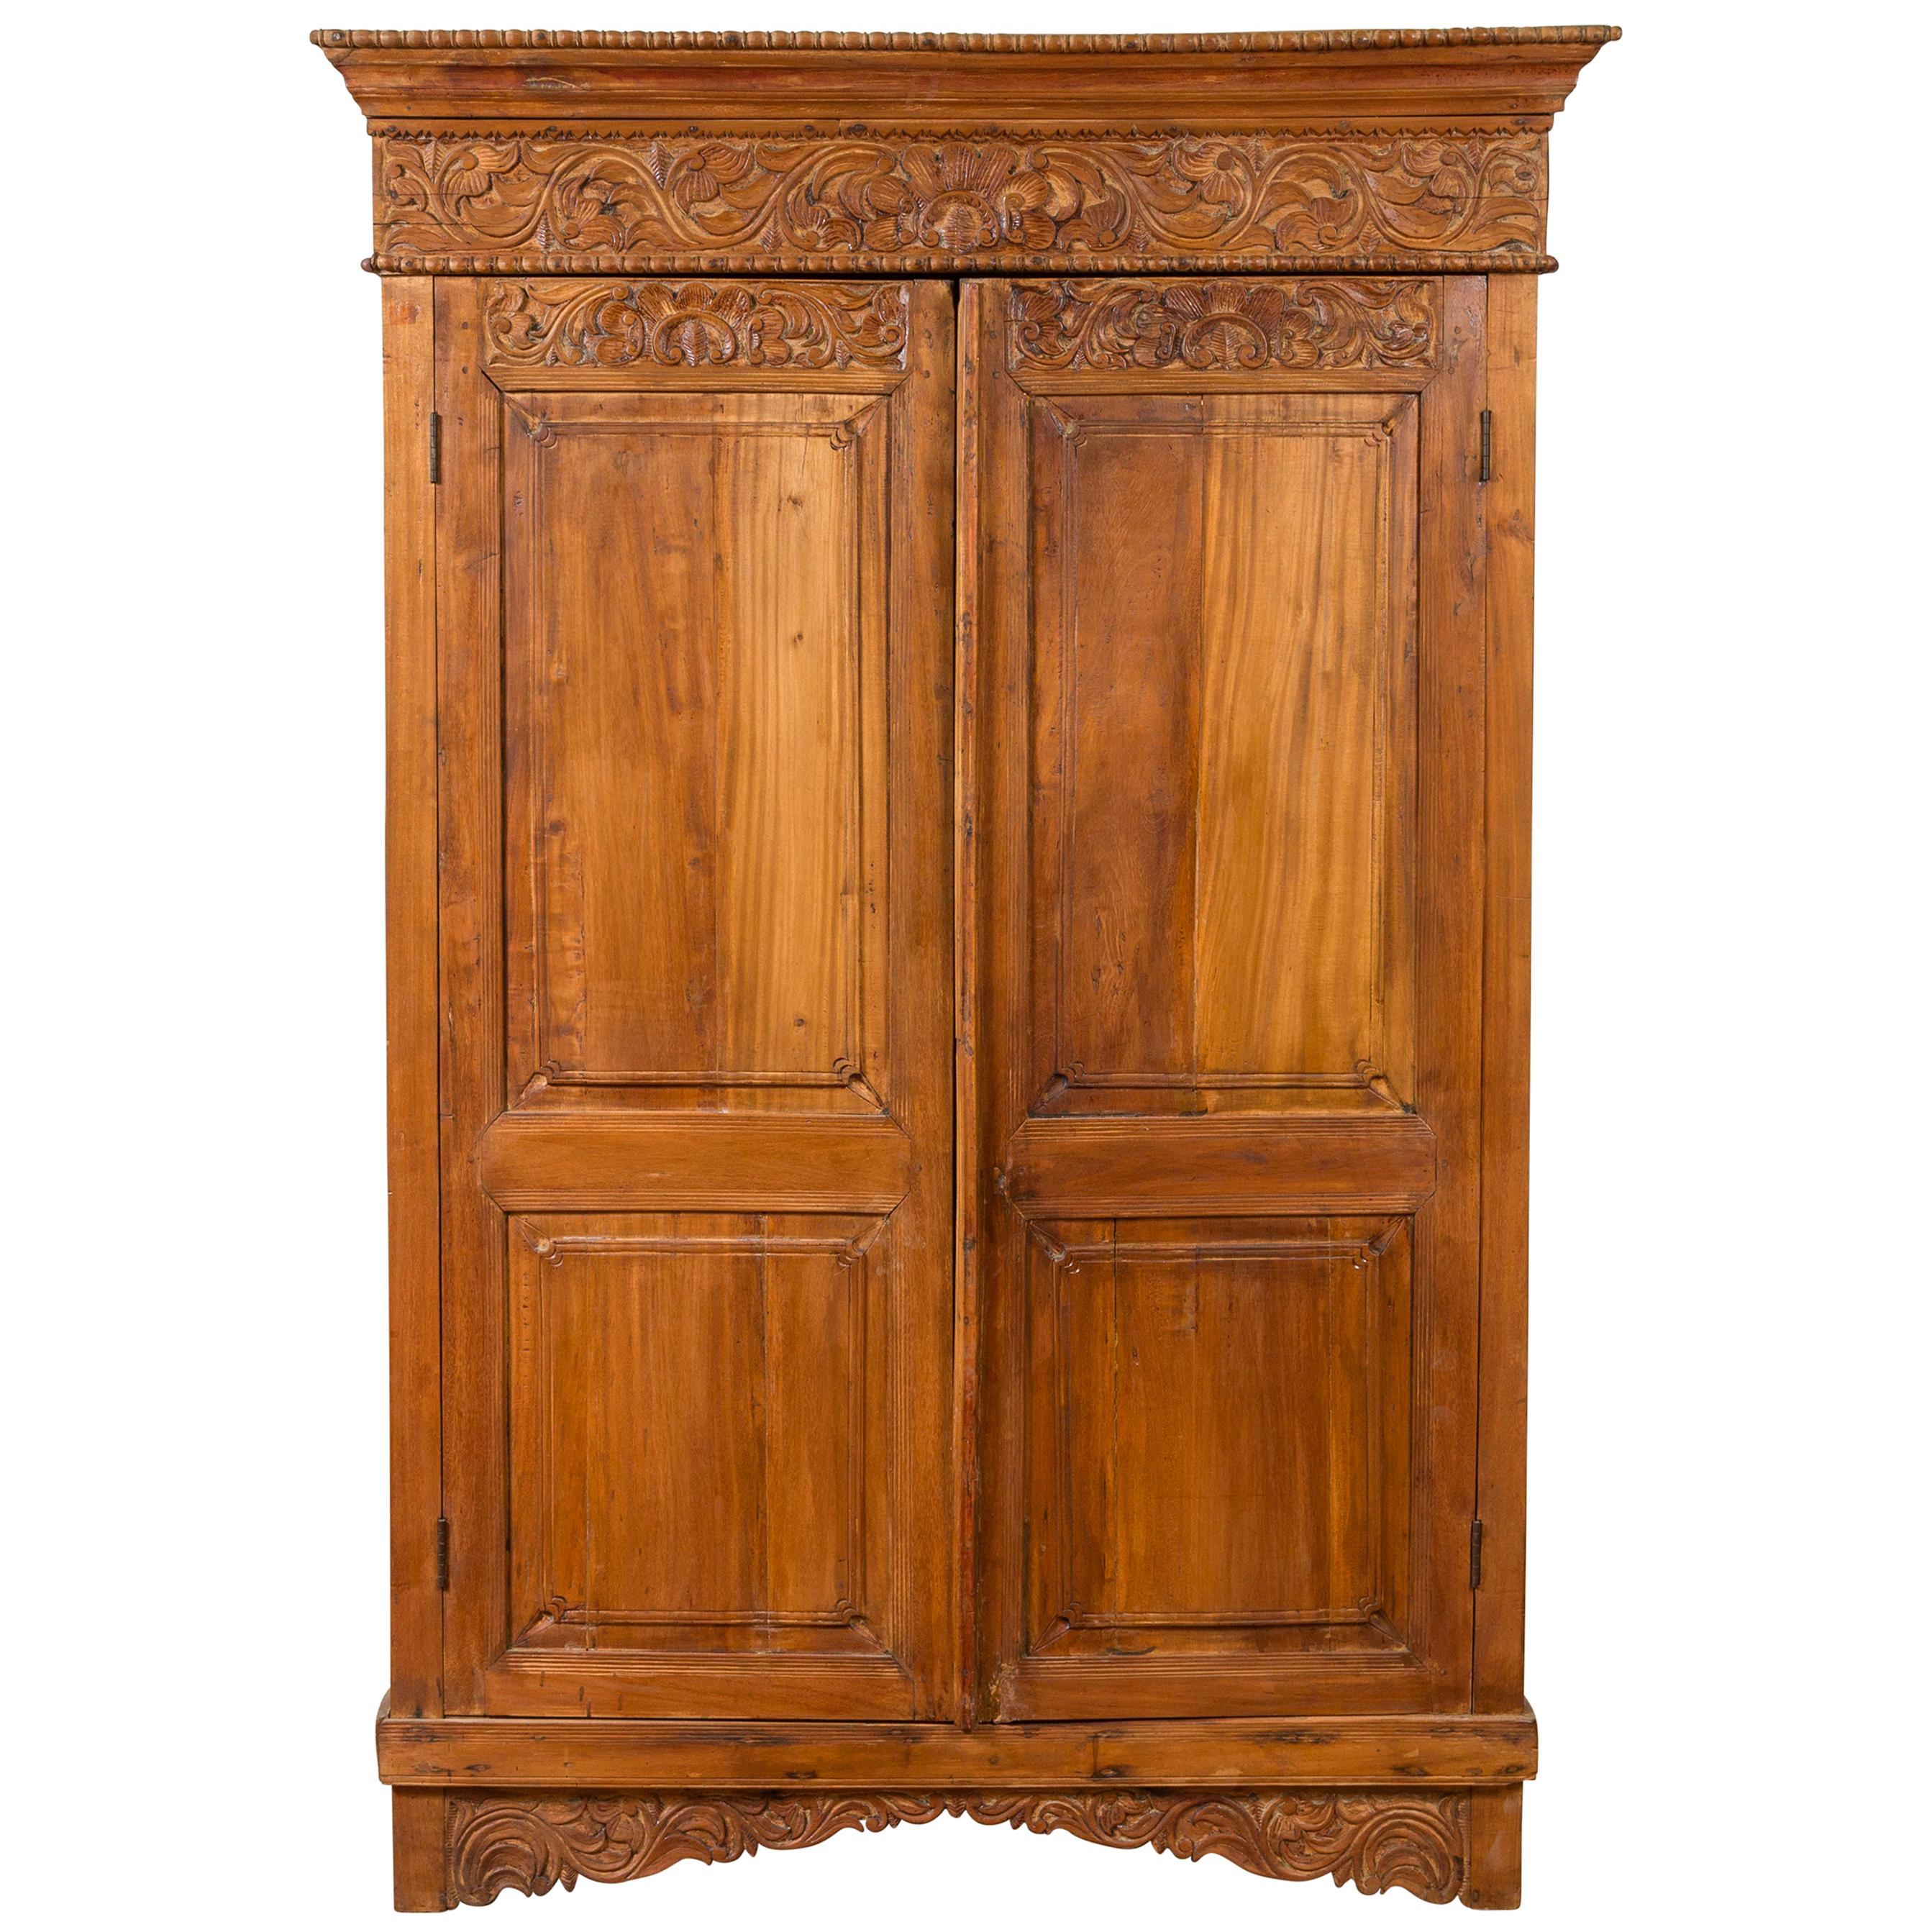 Indian 19th Century Tall Cabinet with Carved Scrolling Foliage and Beaded Motifs